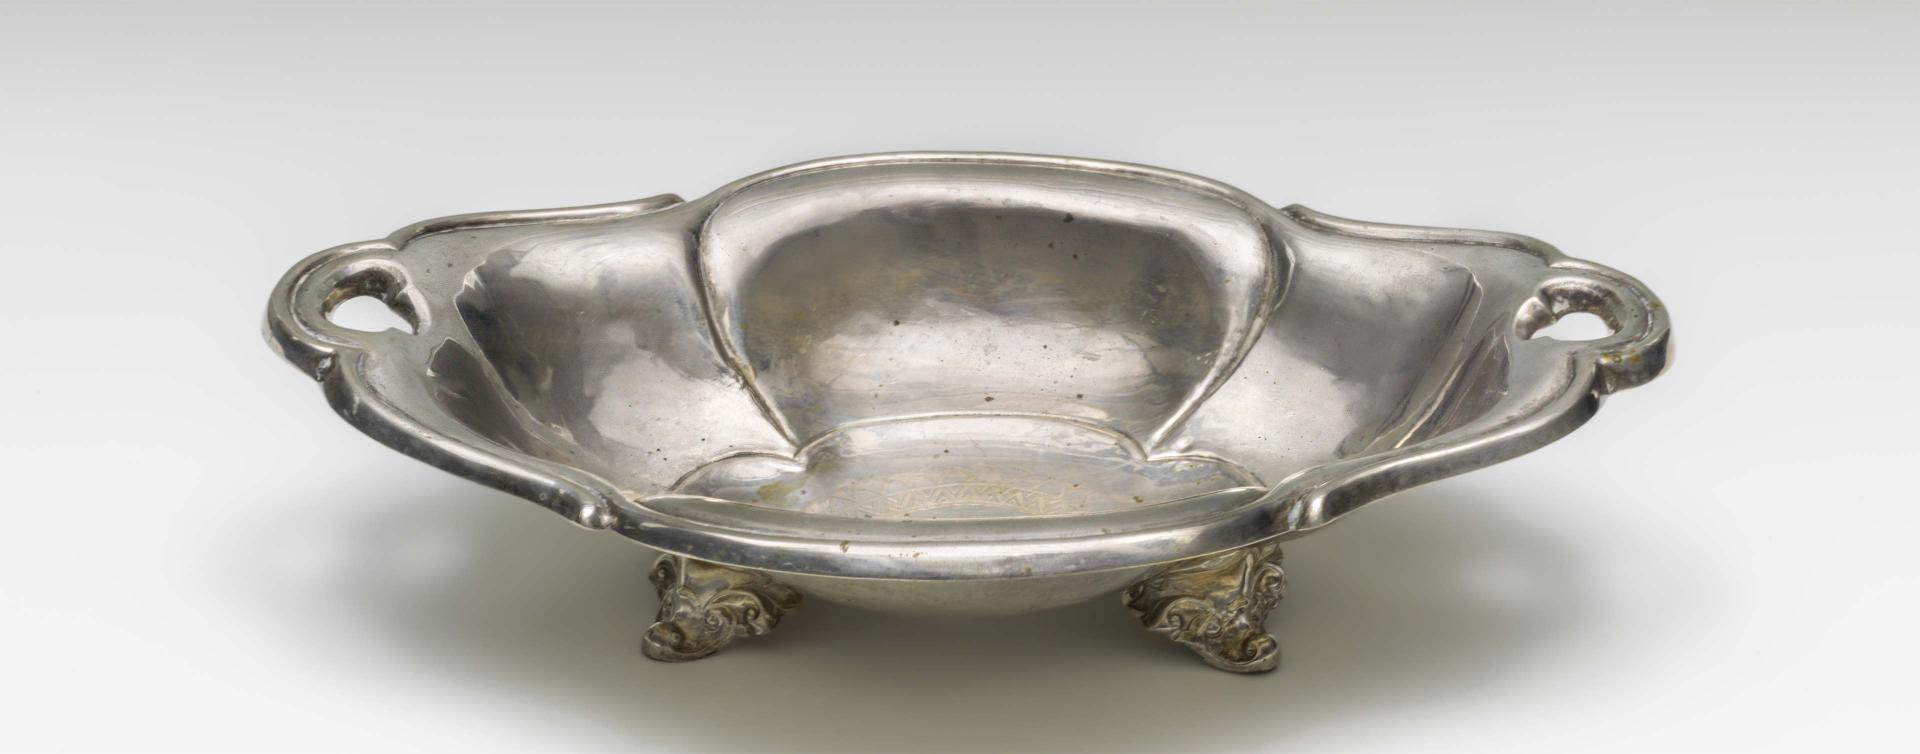 Bowl with two handles and feet, photographed diagonally from above